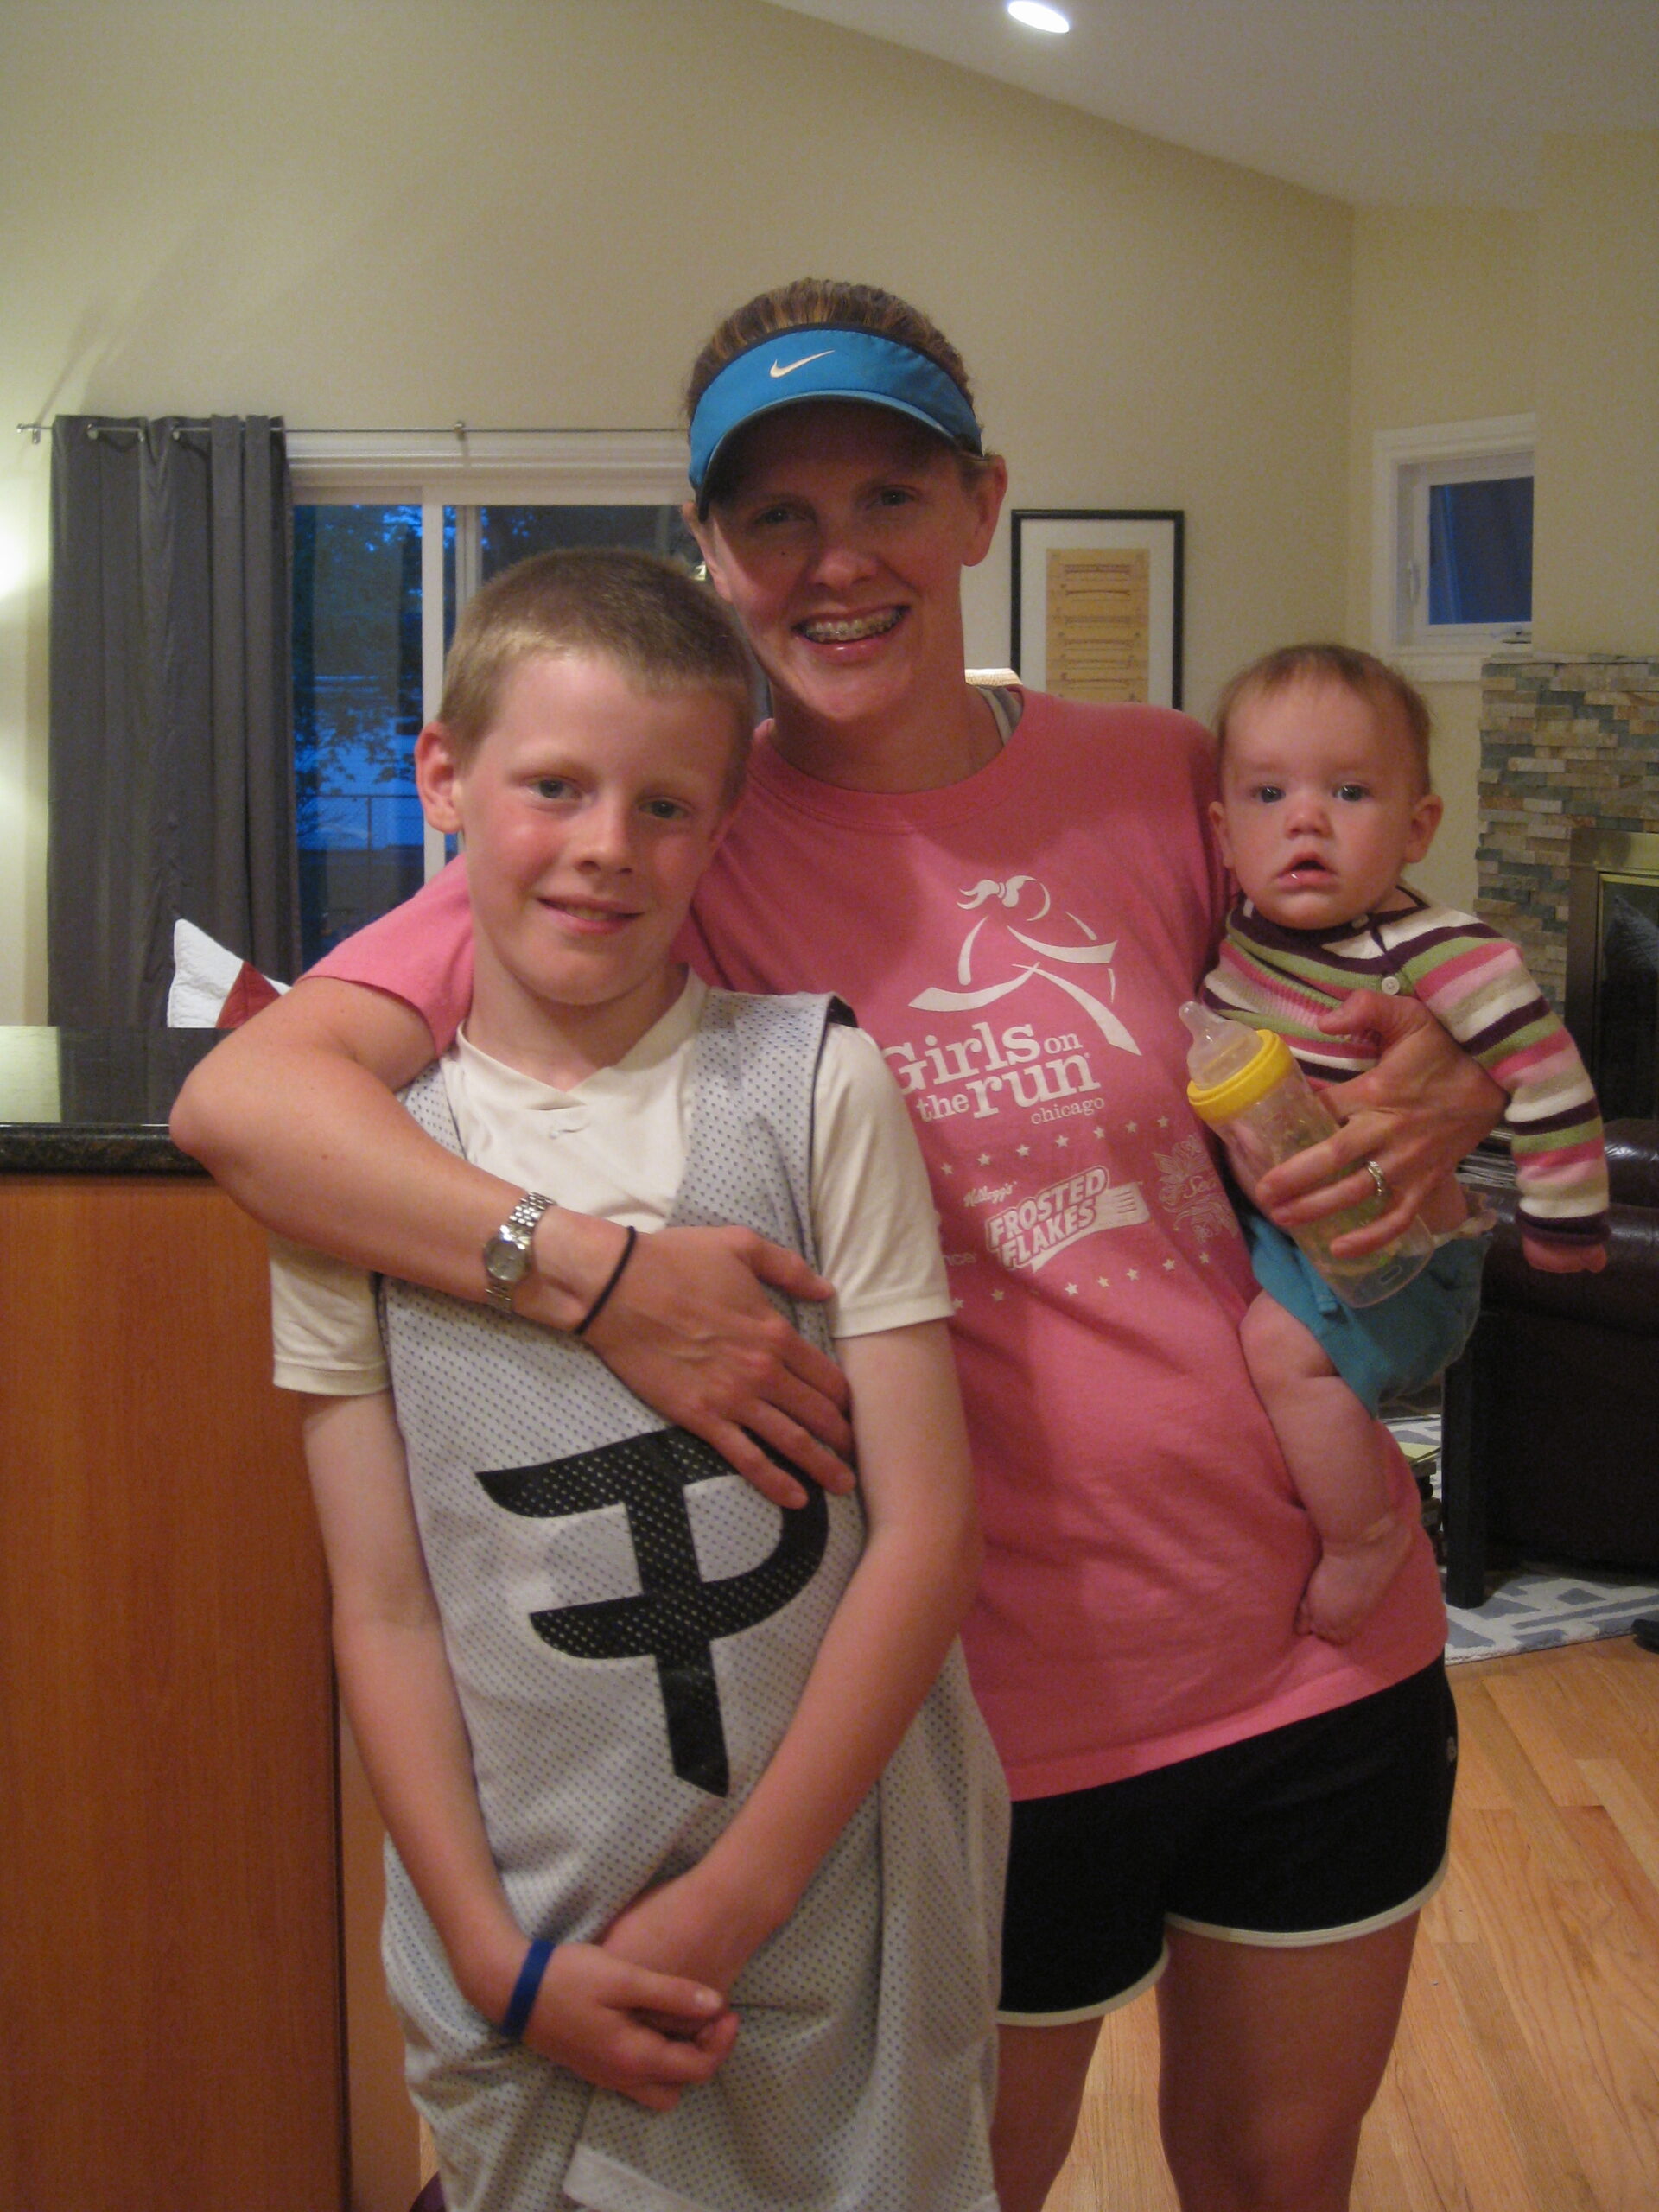 Skinny woman wearing a blue Nike visor, pink T-shirt that says "Girls on the run", and black athletic shorts with white edging, who has her left arm with silver watch and black rubber hair tie on her wrist crossed in front of a young boy who is slightly blocking her while holding in her left arm a toddler.  The young boy has cropped blond hair and is wearing a white T-shirt with an oversized gray athletic vvest with a stylized "P" on it and has a rubber blue bracelet on his left wrist.  The toddler is wearing a brown, white, and pink striped top and blue jeans. In the background is a living room with a white and gray rug, a gray and white brick fireplace, a small window, a piece of artwork on the beige walls, and sliding glass doors with gray curtains.